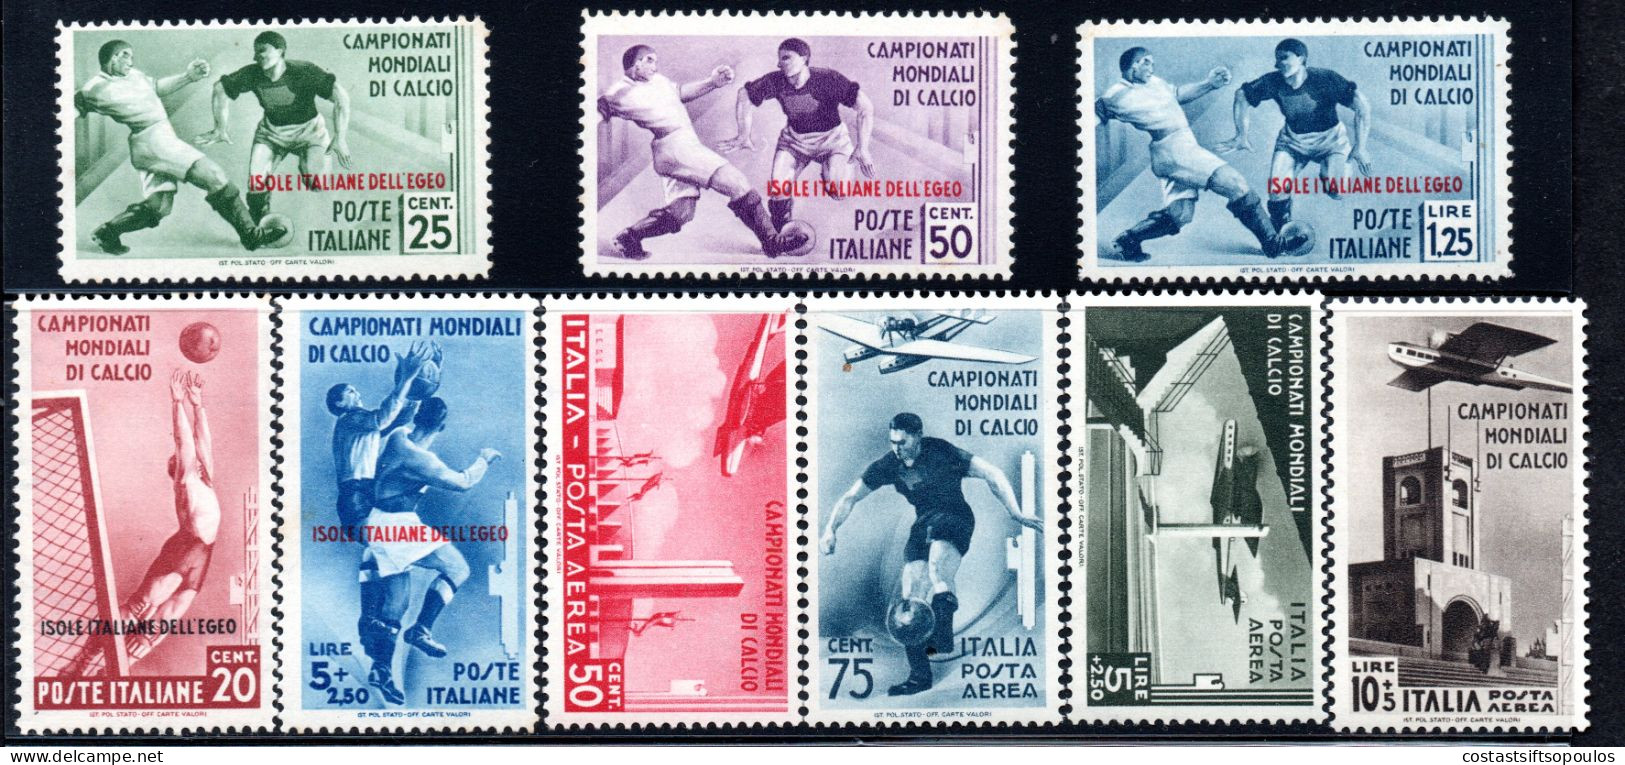 2786. -5.GREECE,ITALY,DODECANESE,1934 SOCCER,FOOTBALL,SC.31-35, C28-C31MNH.LIGHT GUM BLEMISHES, SEE SCAN. - Dodécanèse